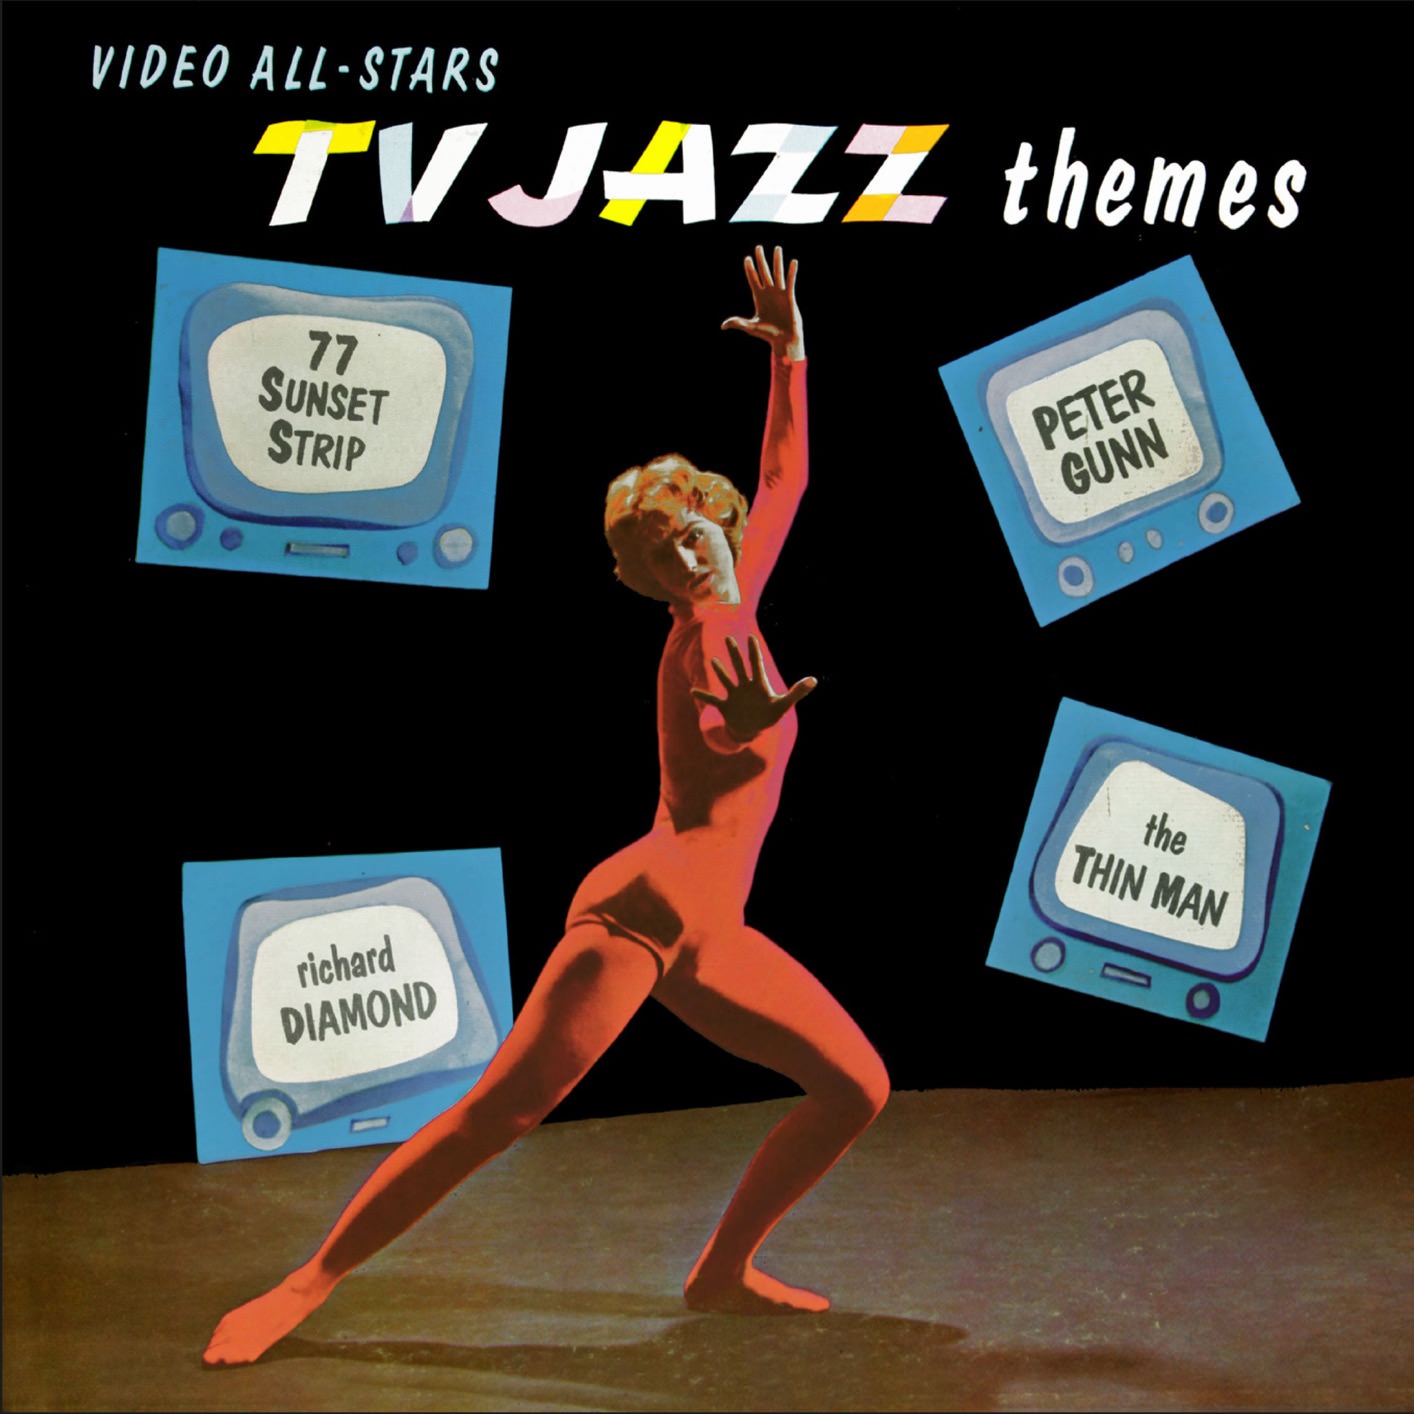 Skip Martin & The Video All-Stars – TV Jazz Themes (Remastered from the Original Somerset Tapes) (2017/2018) [FLAC 24bit/96kHz]